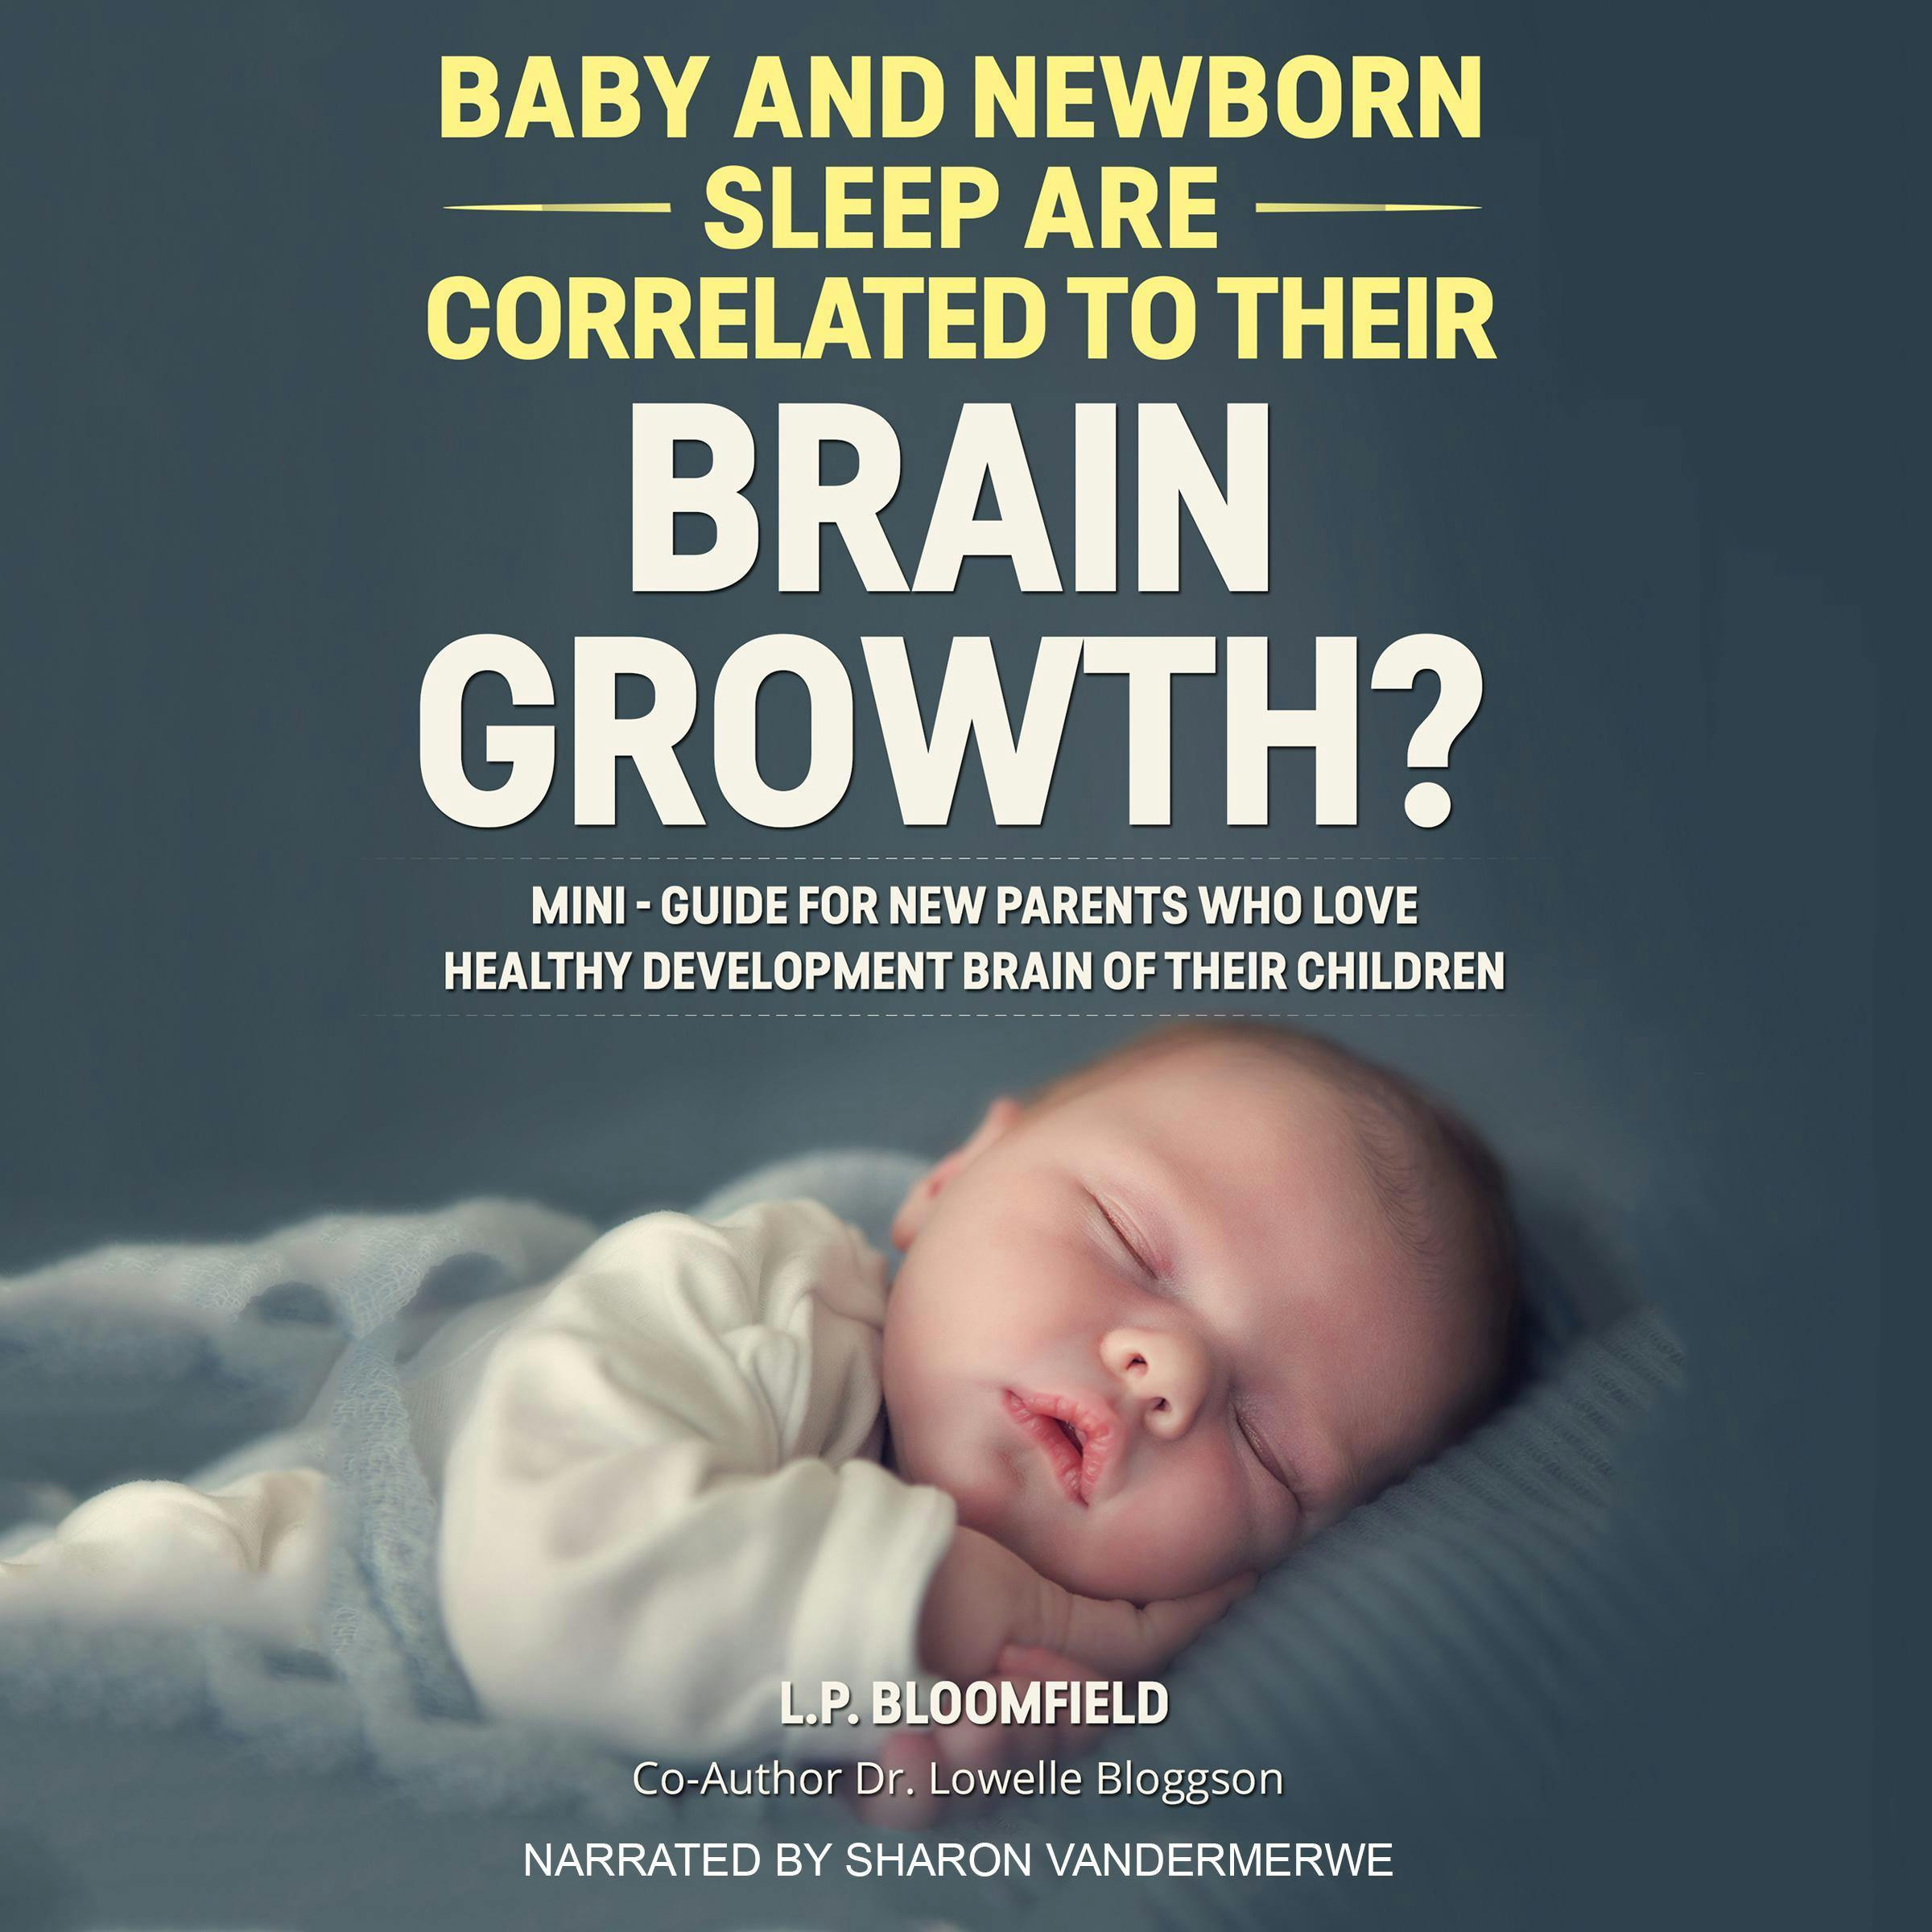 Baby and Newborn Sleep are Correlated to their Brain Growth? - Bloomfield - Bloggson